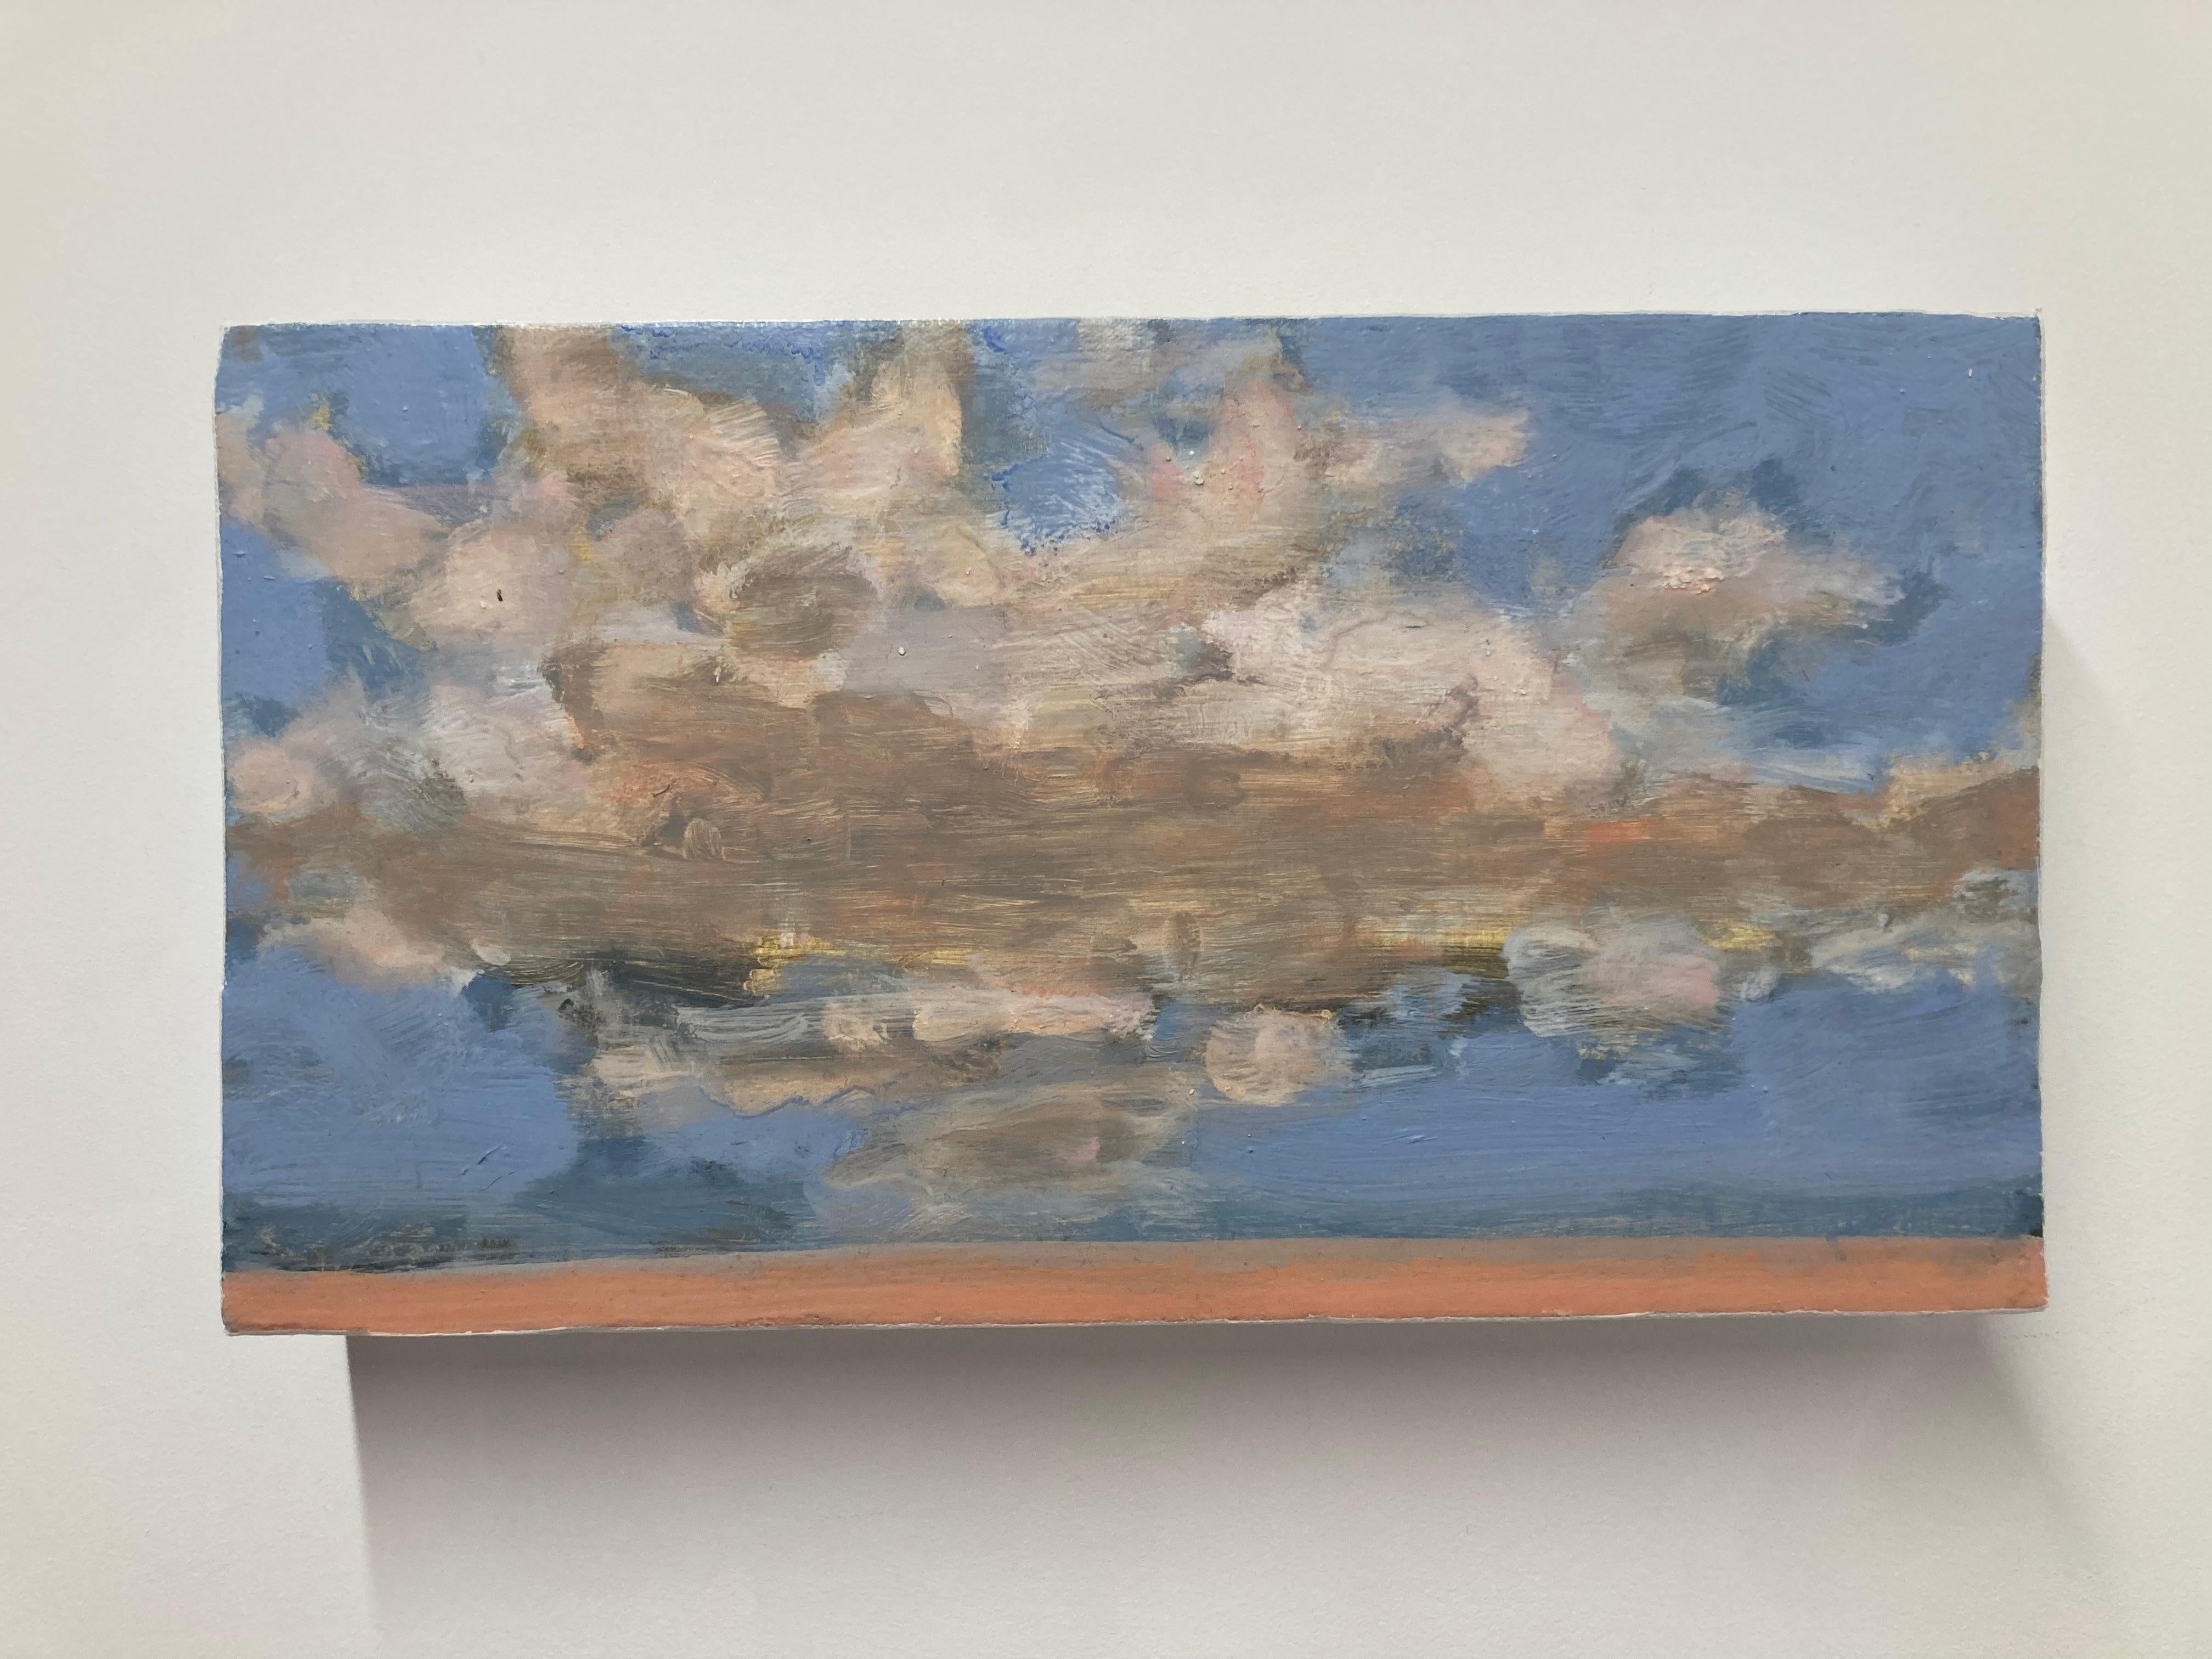 Fluffy, ivory clouds with warm glimmers of pale peach and hints of light yellow float in an idyllic blue sky over a sandy beach. Signed, dated and titled on verso.

David Konigsberg applies many layers of thinned oil paint to achieve his atmospheric